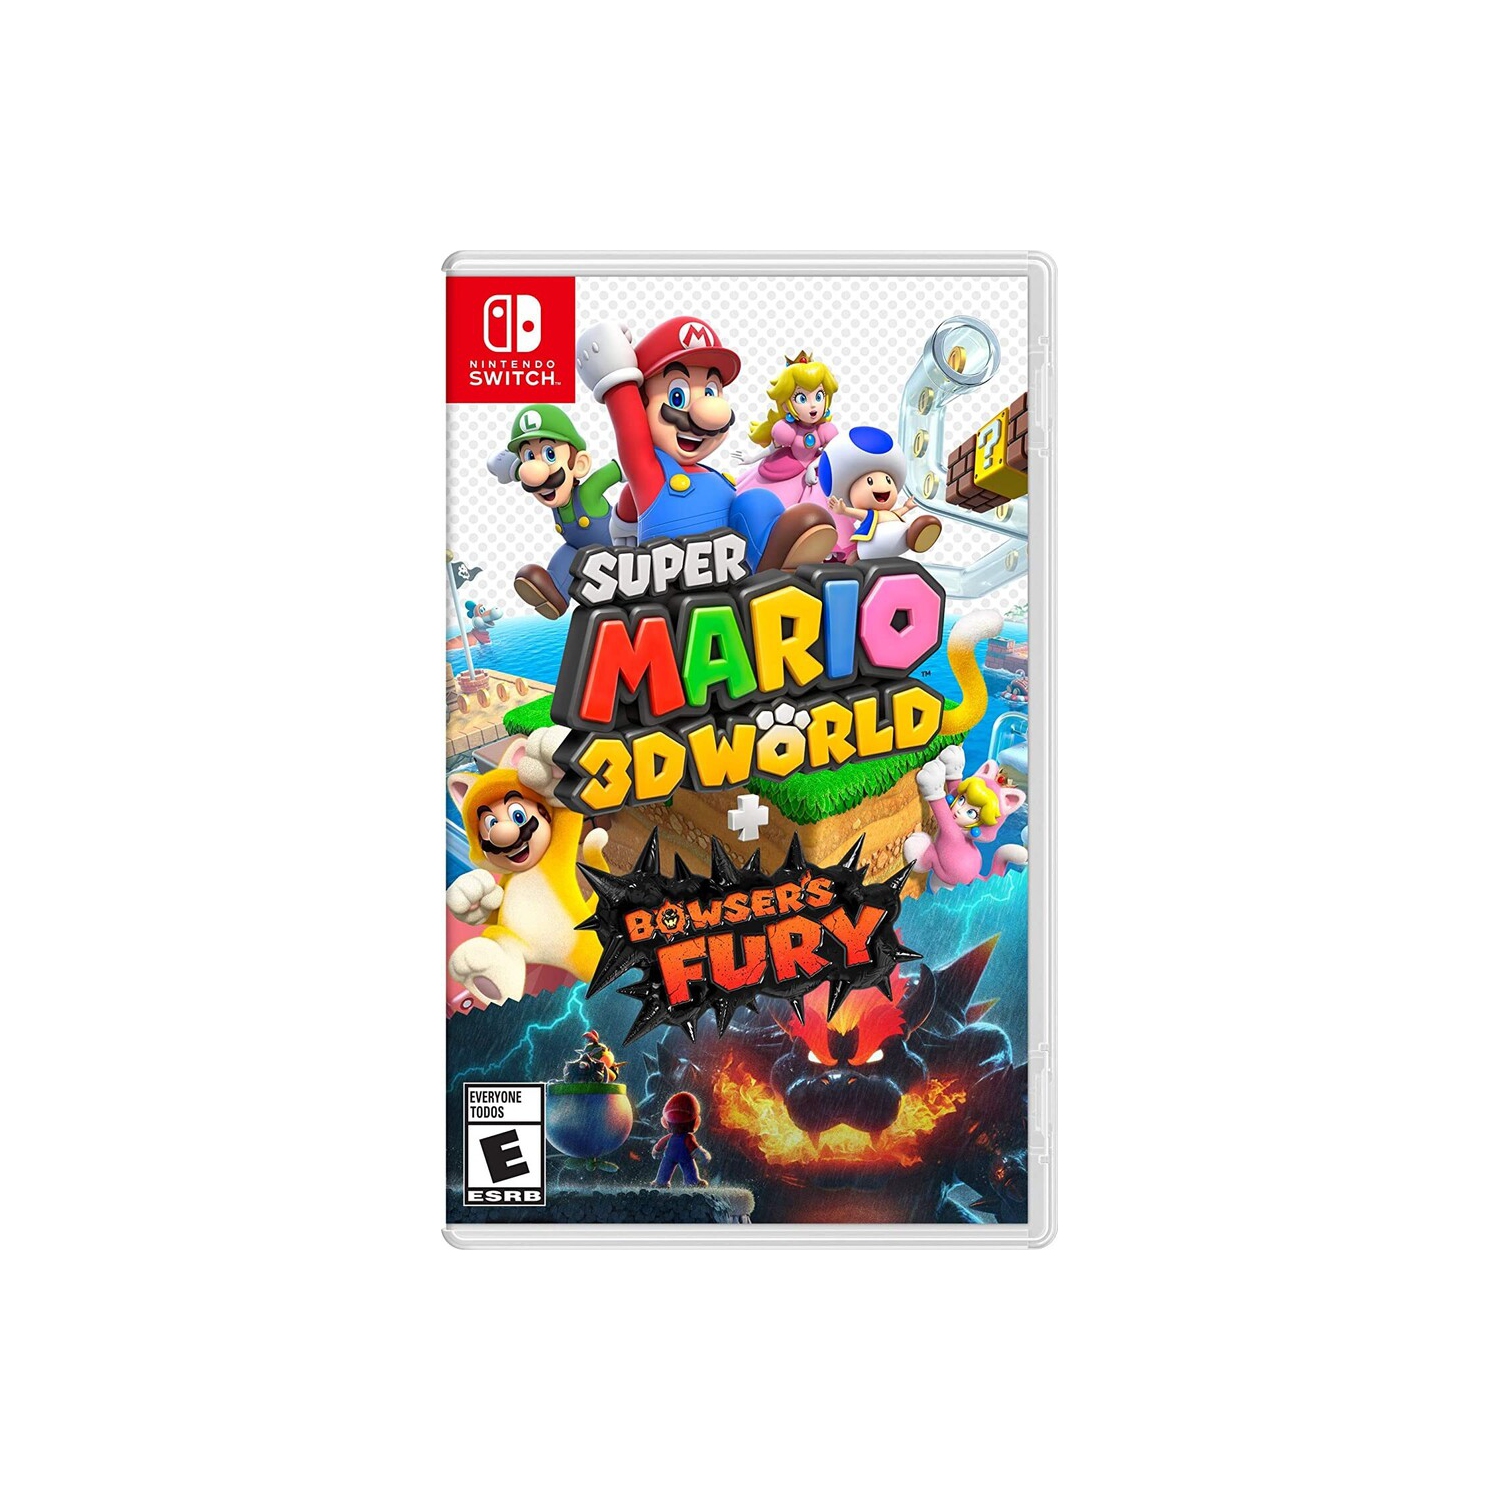 Super Mario 3D World + Bowser's Fury for Nintendo Switch [VIDEOGAMES]